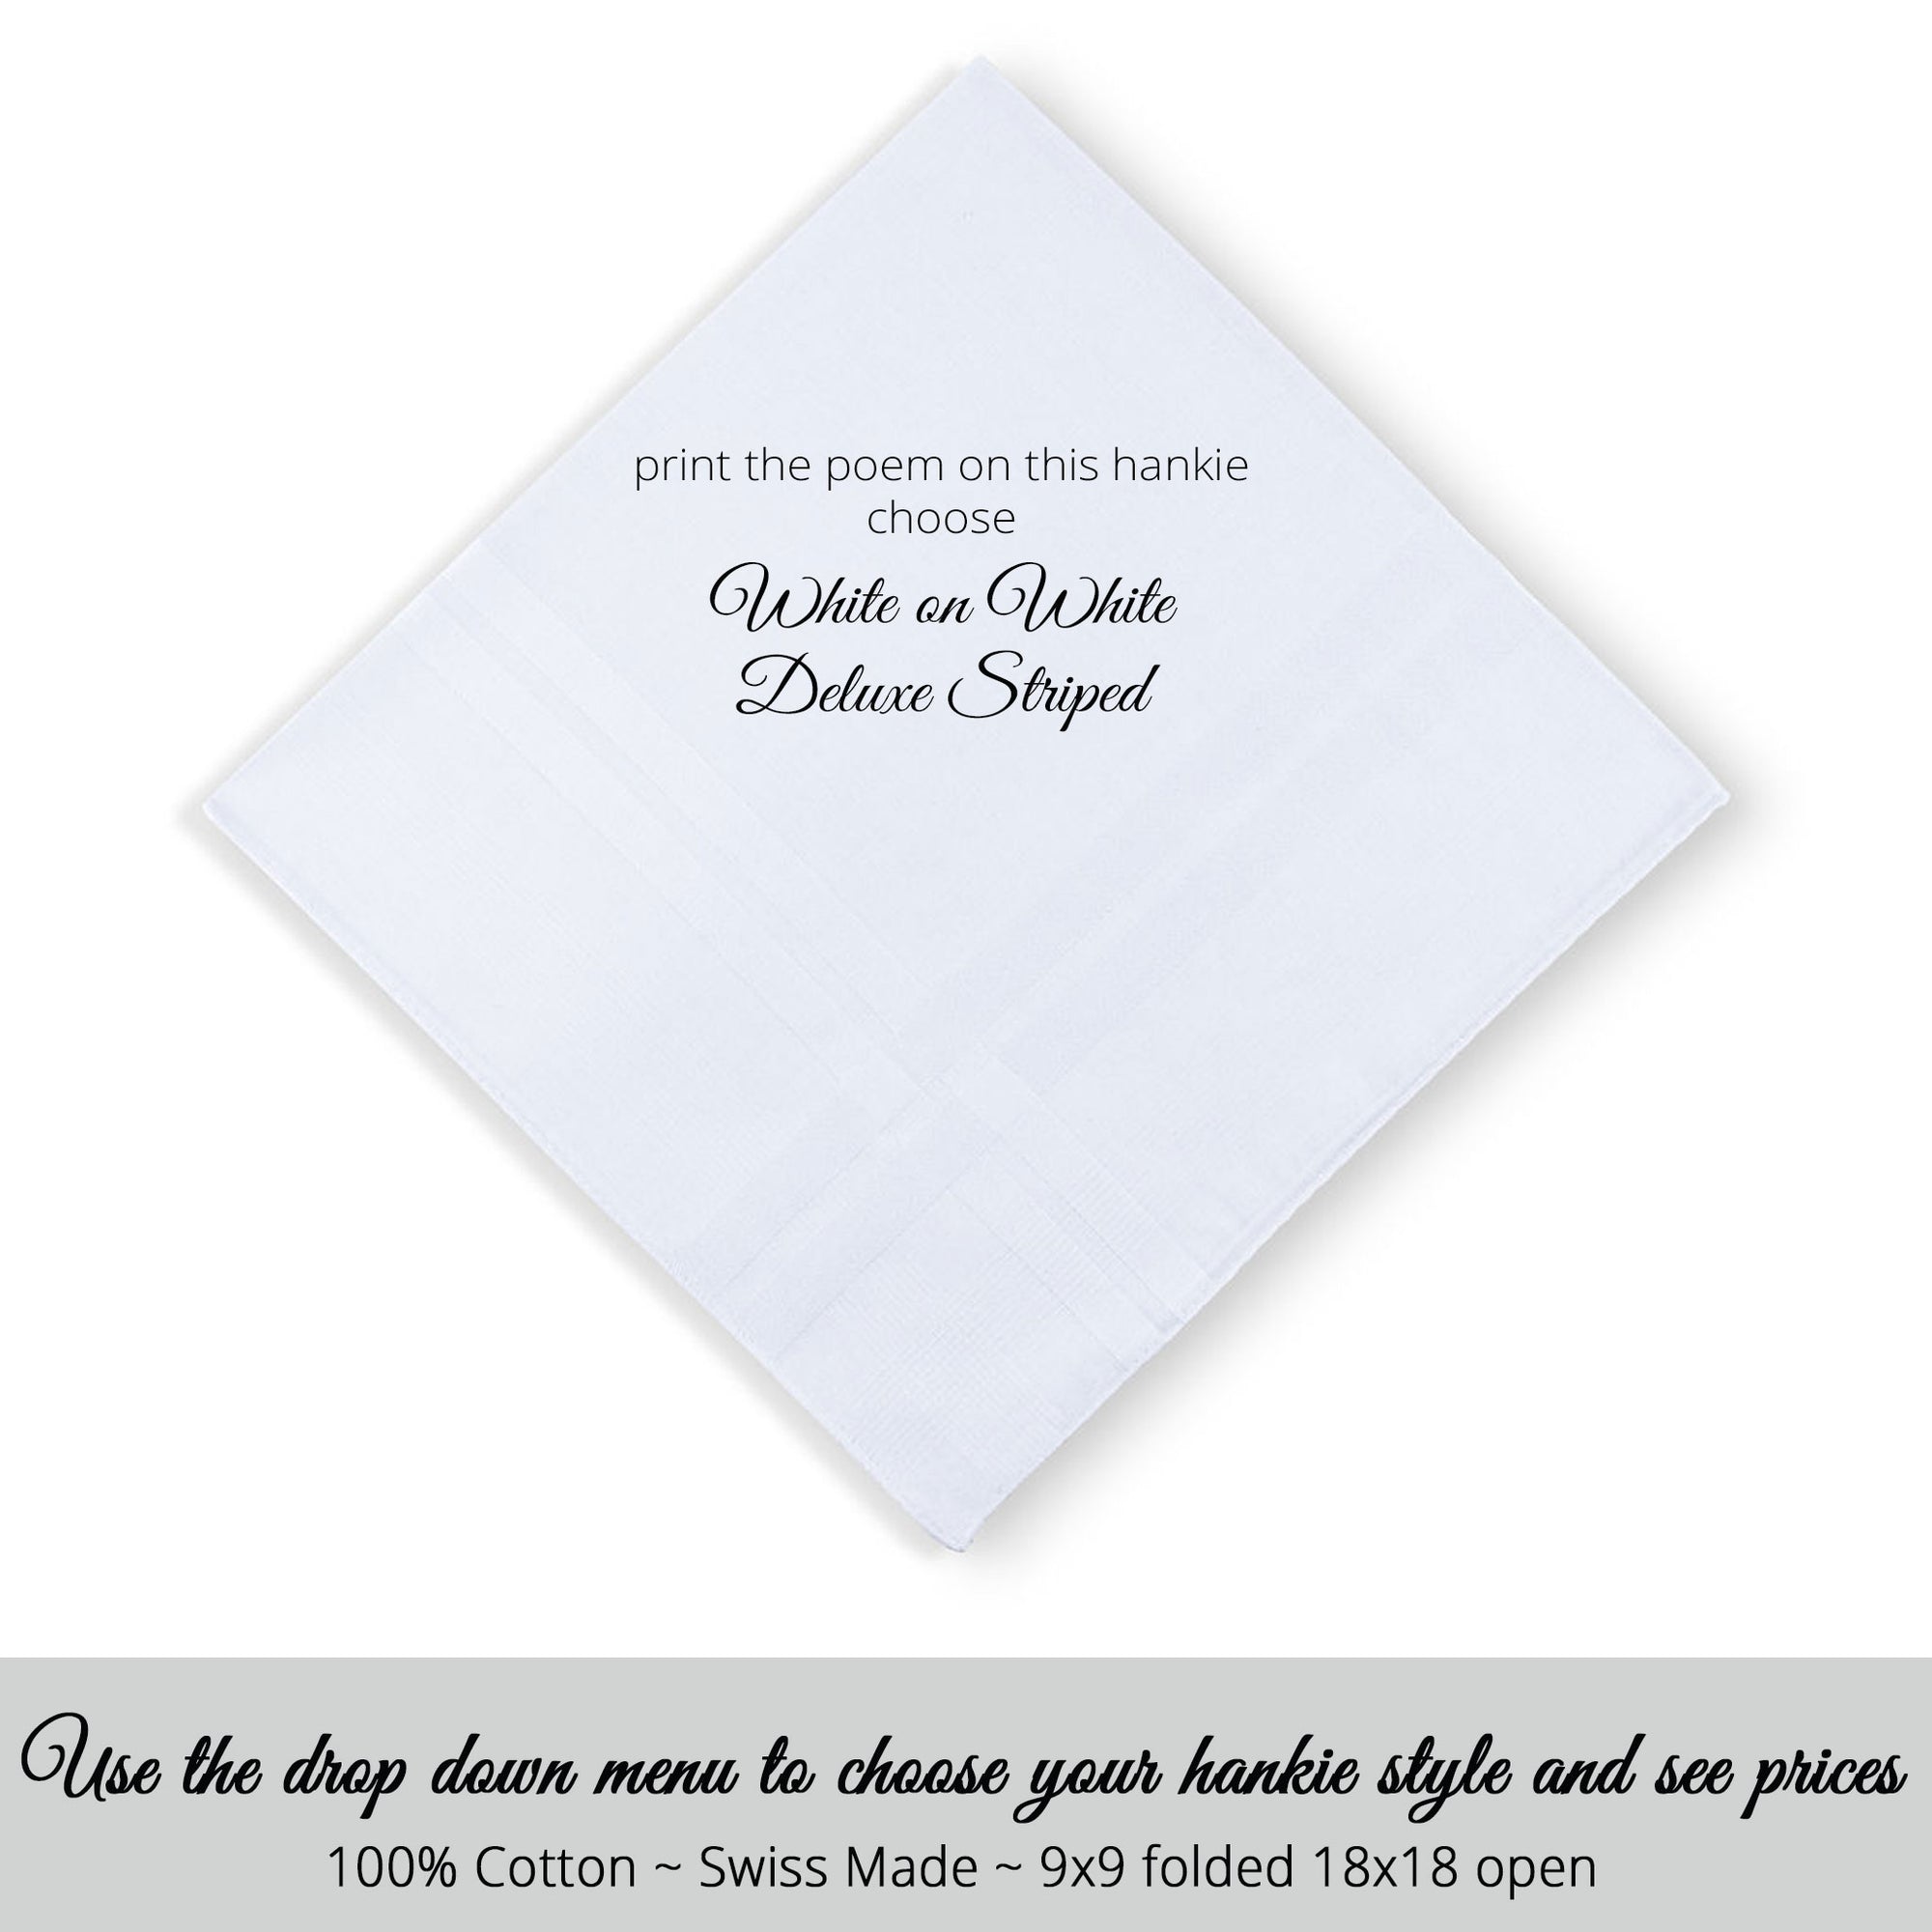 Gay Wedding Masculine Hankie style Swiss made white on white deluxe striped for the Bridesmaid poem printed hankie